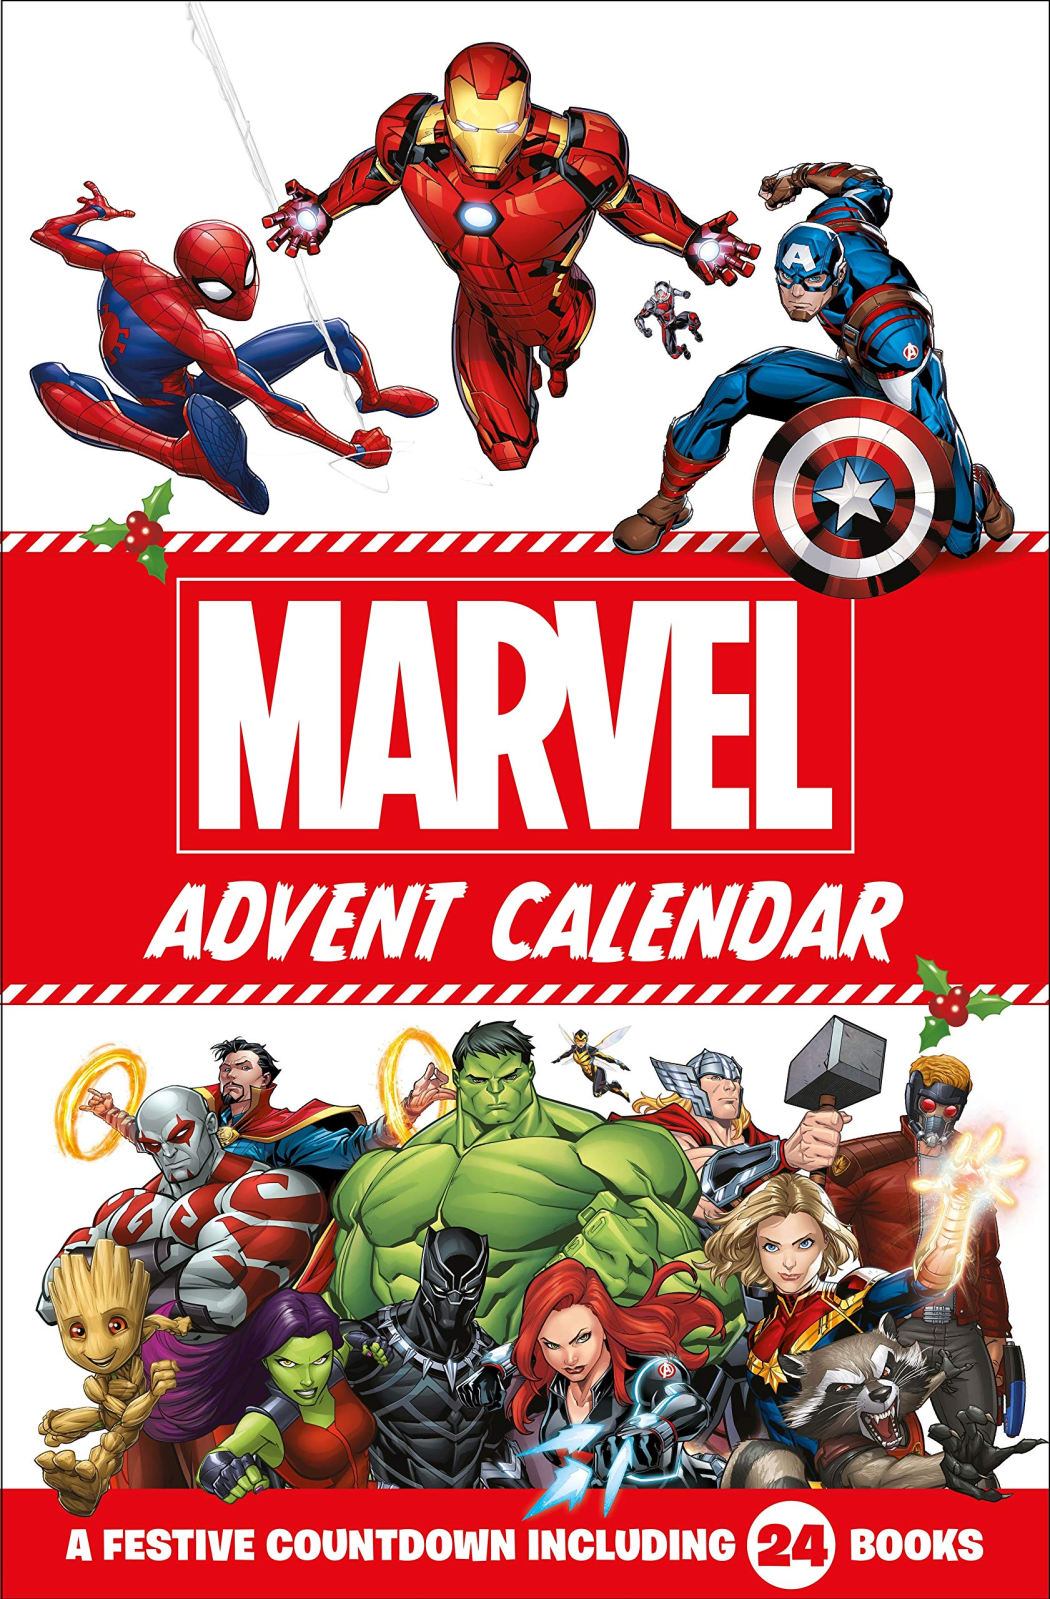 2020 Marvel Storybook Advent Calendar Available Now   Full Spoilers